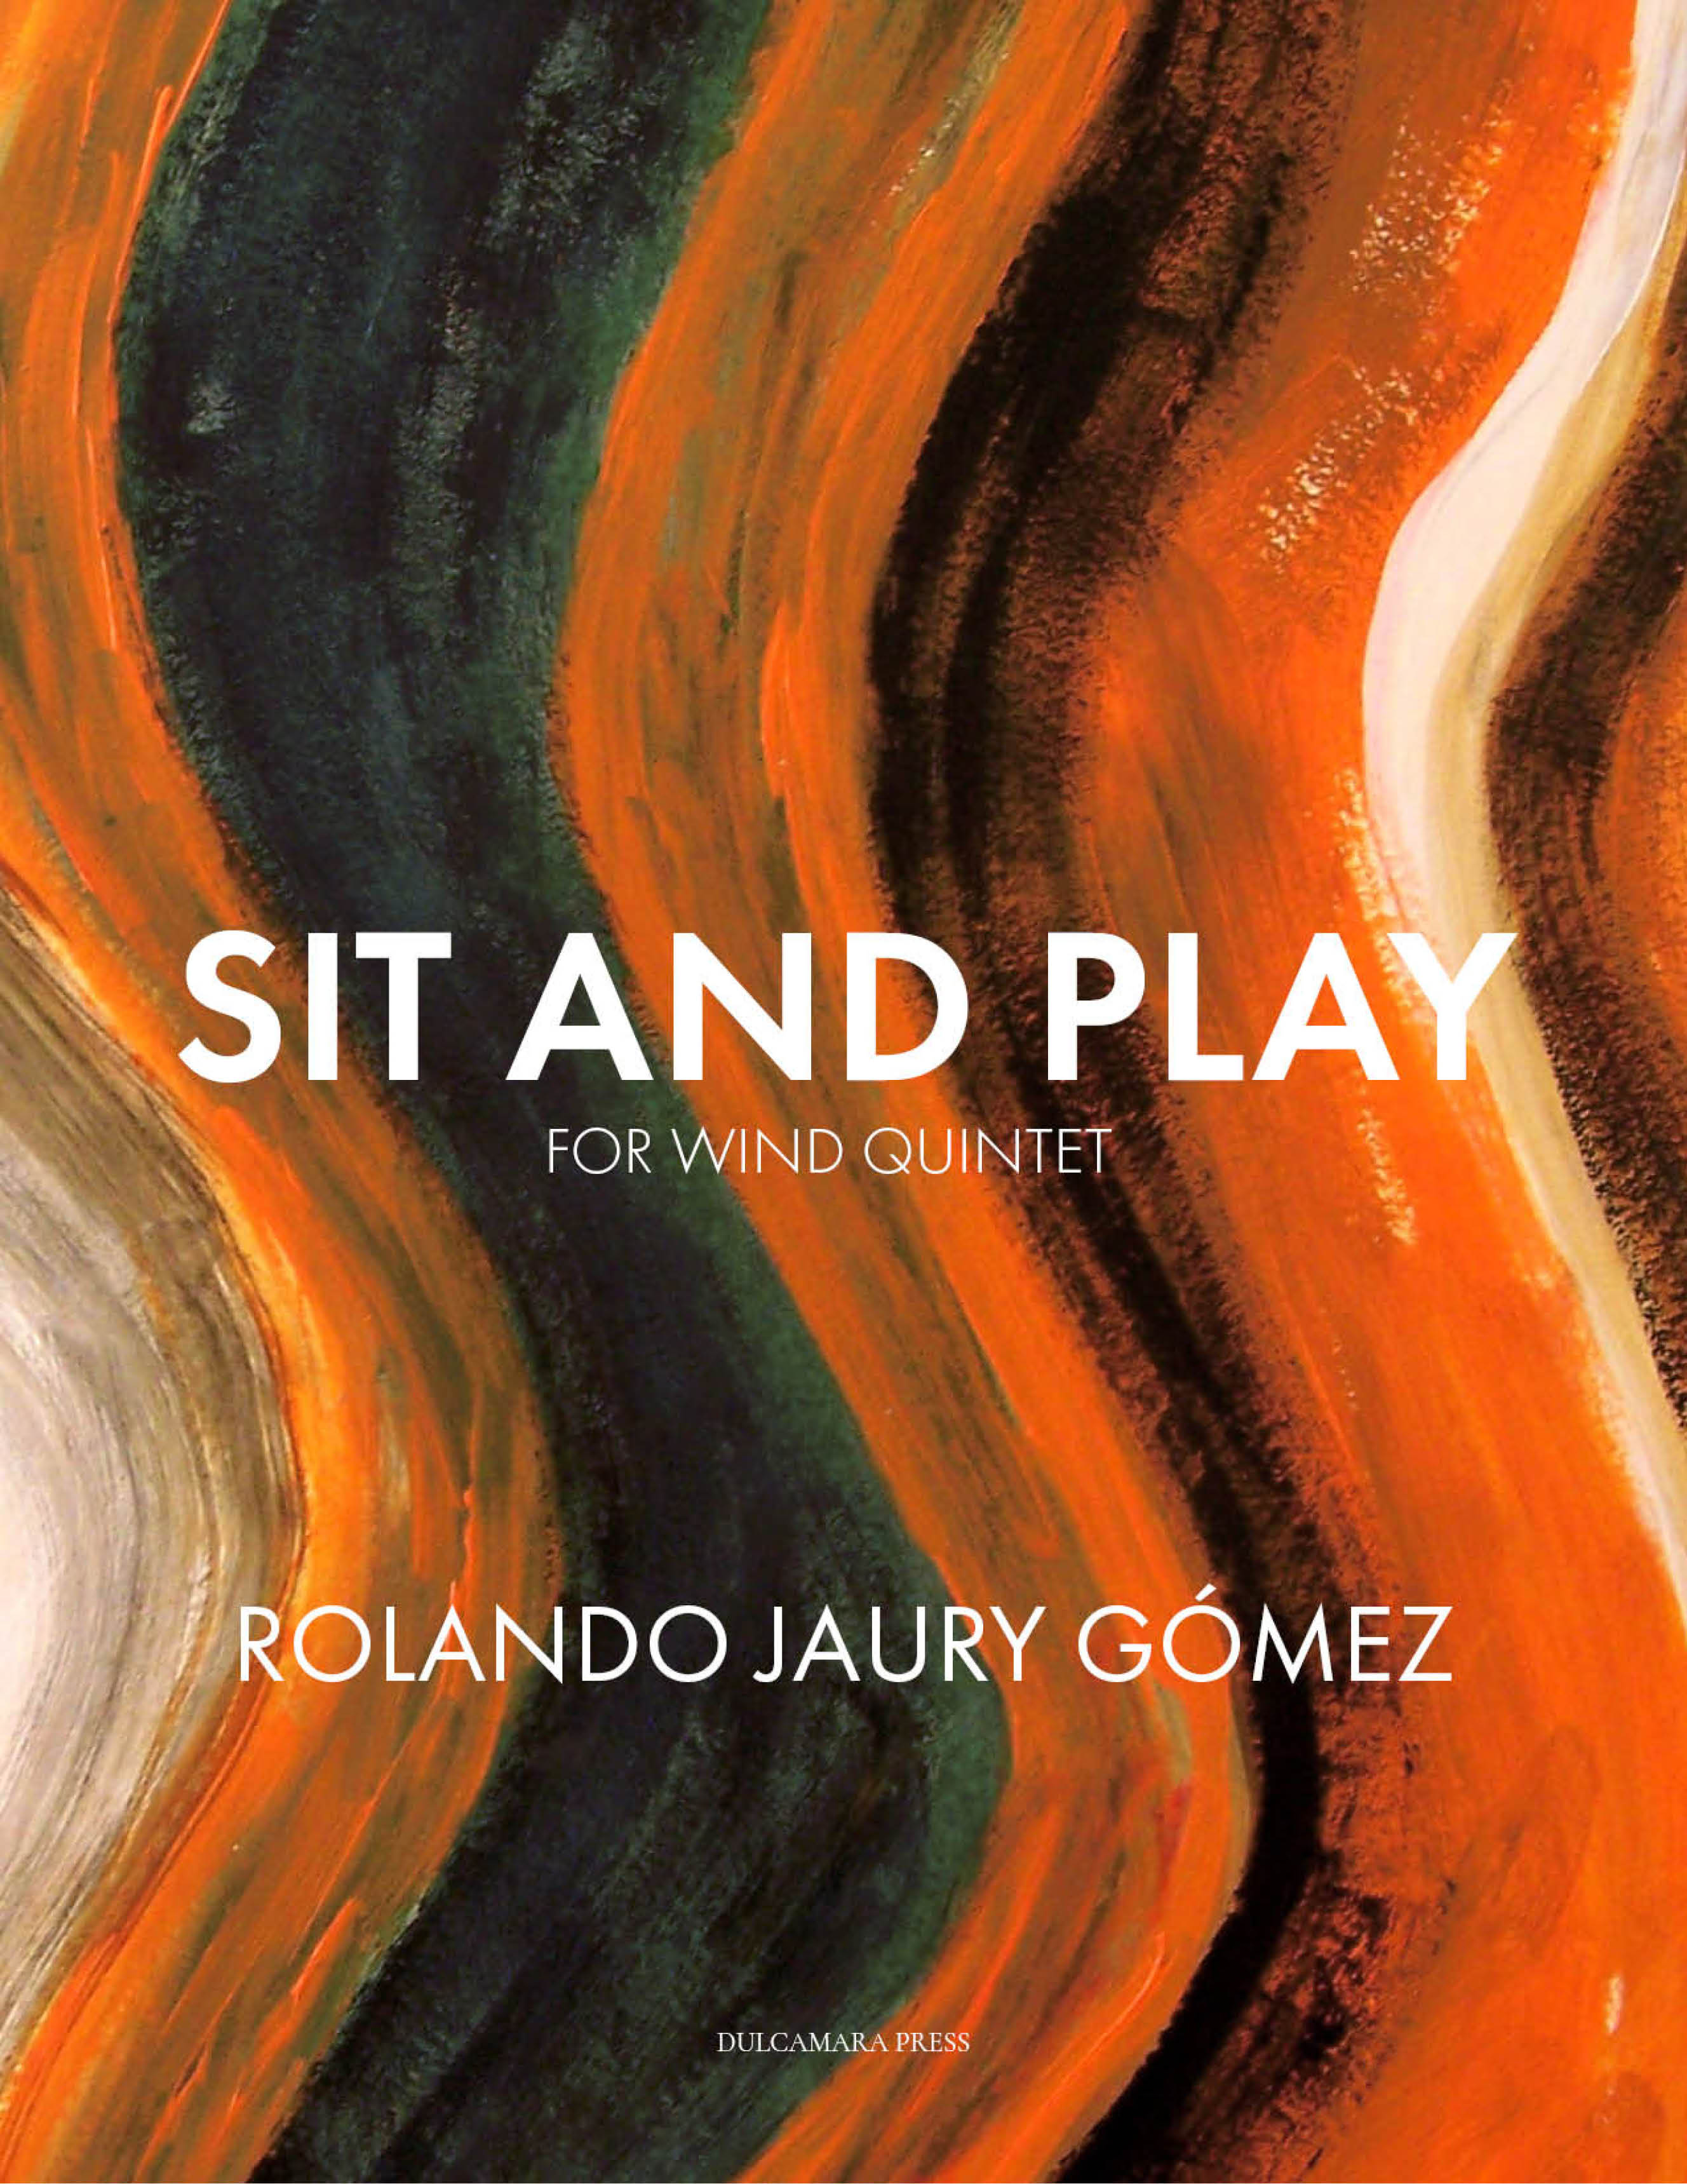 Sit and Play; wind quintet by Rolando Gomez